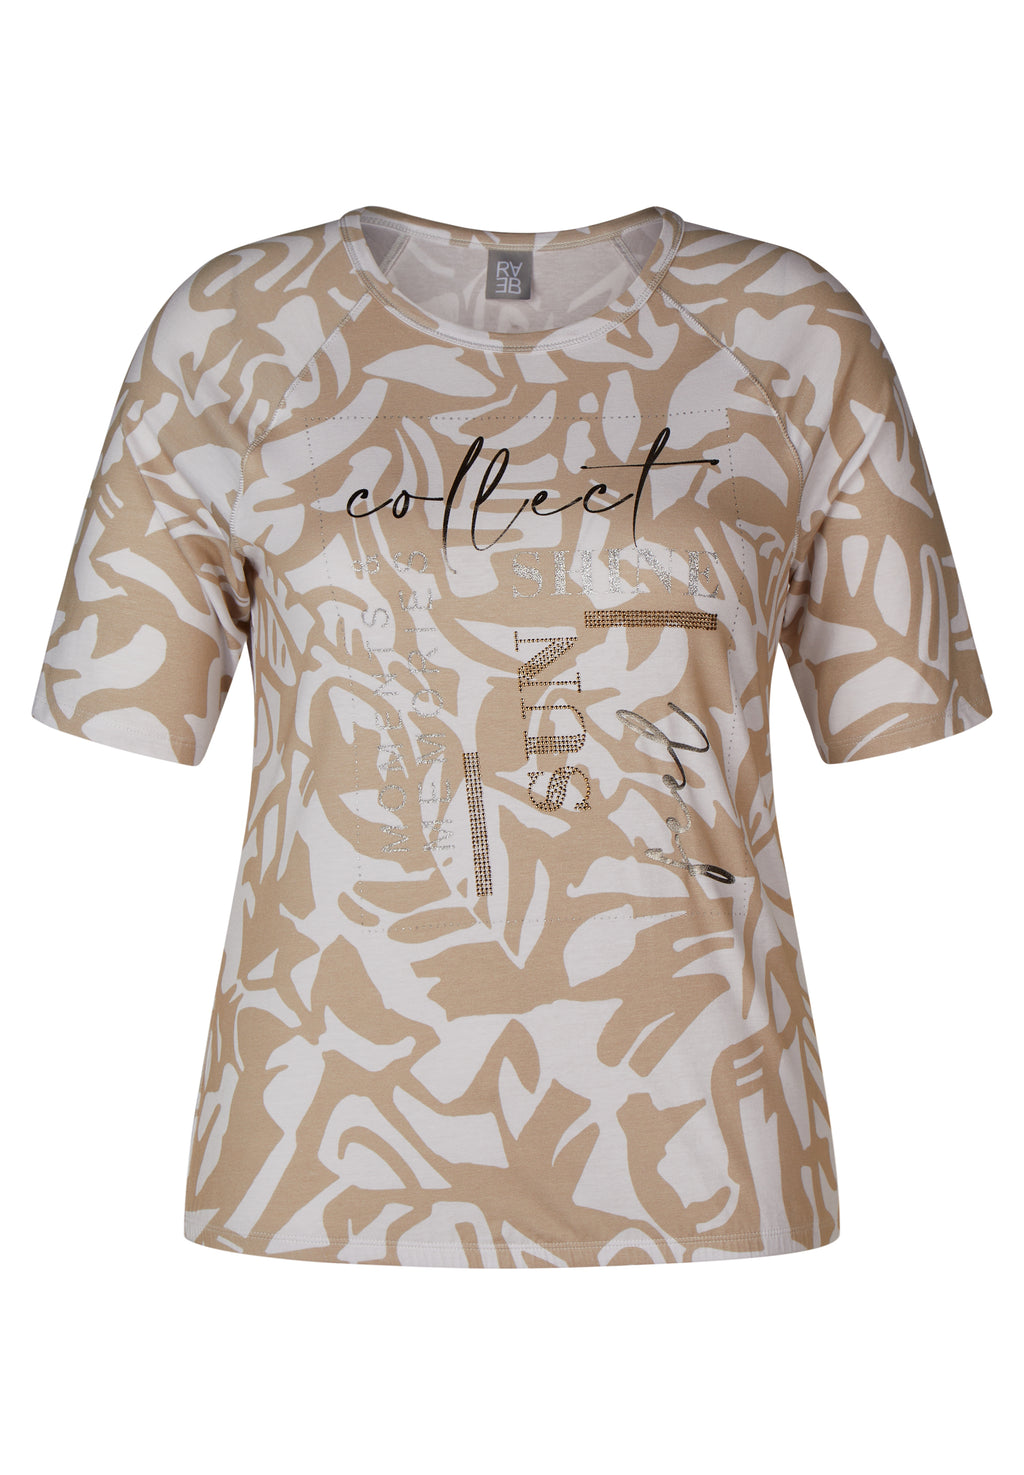 Rabe sunset bay collection printed tshirt in beige and white, product code 52-224352